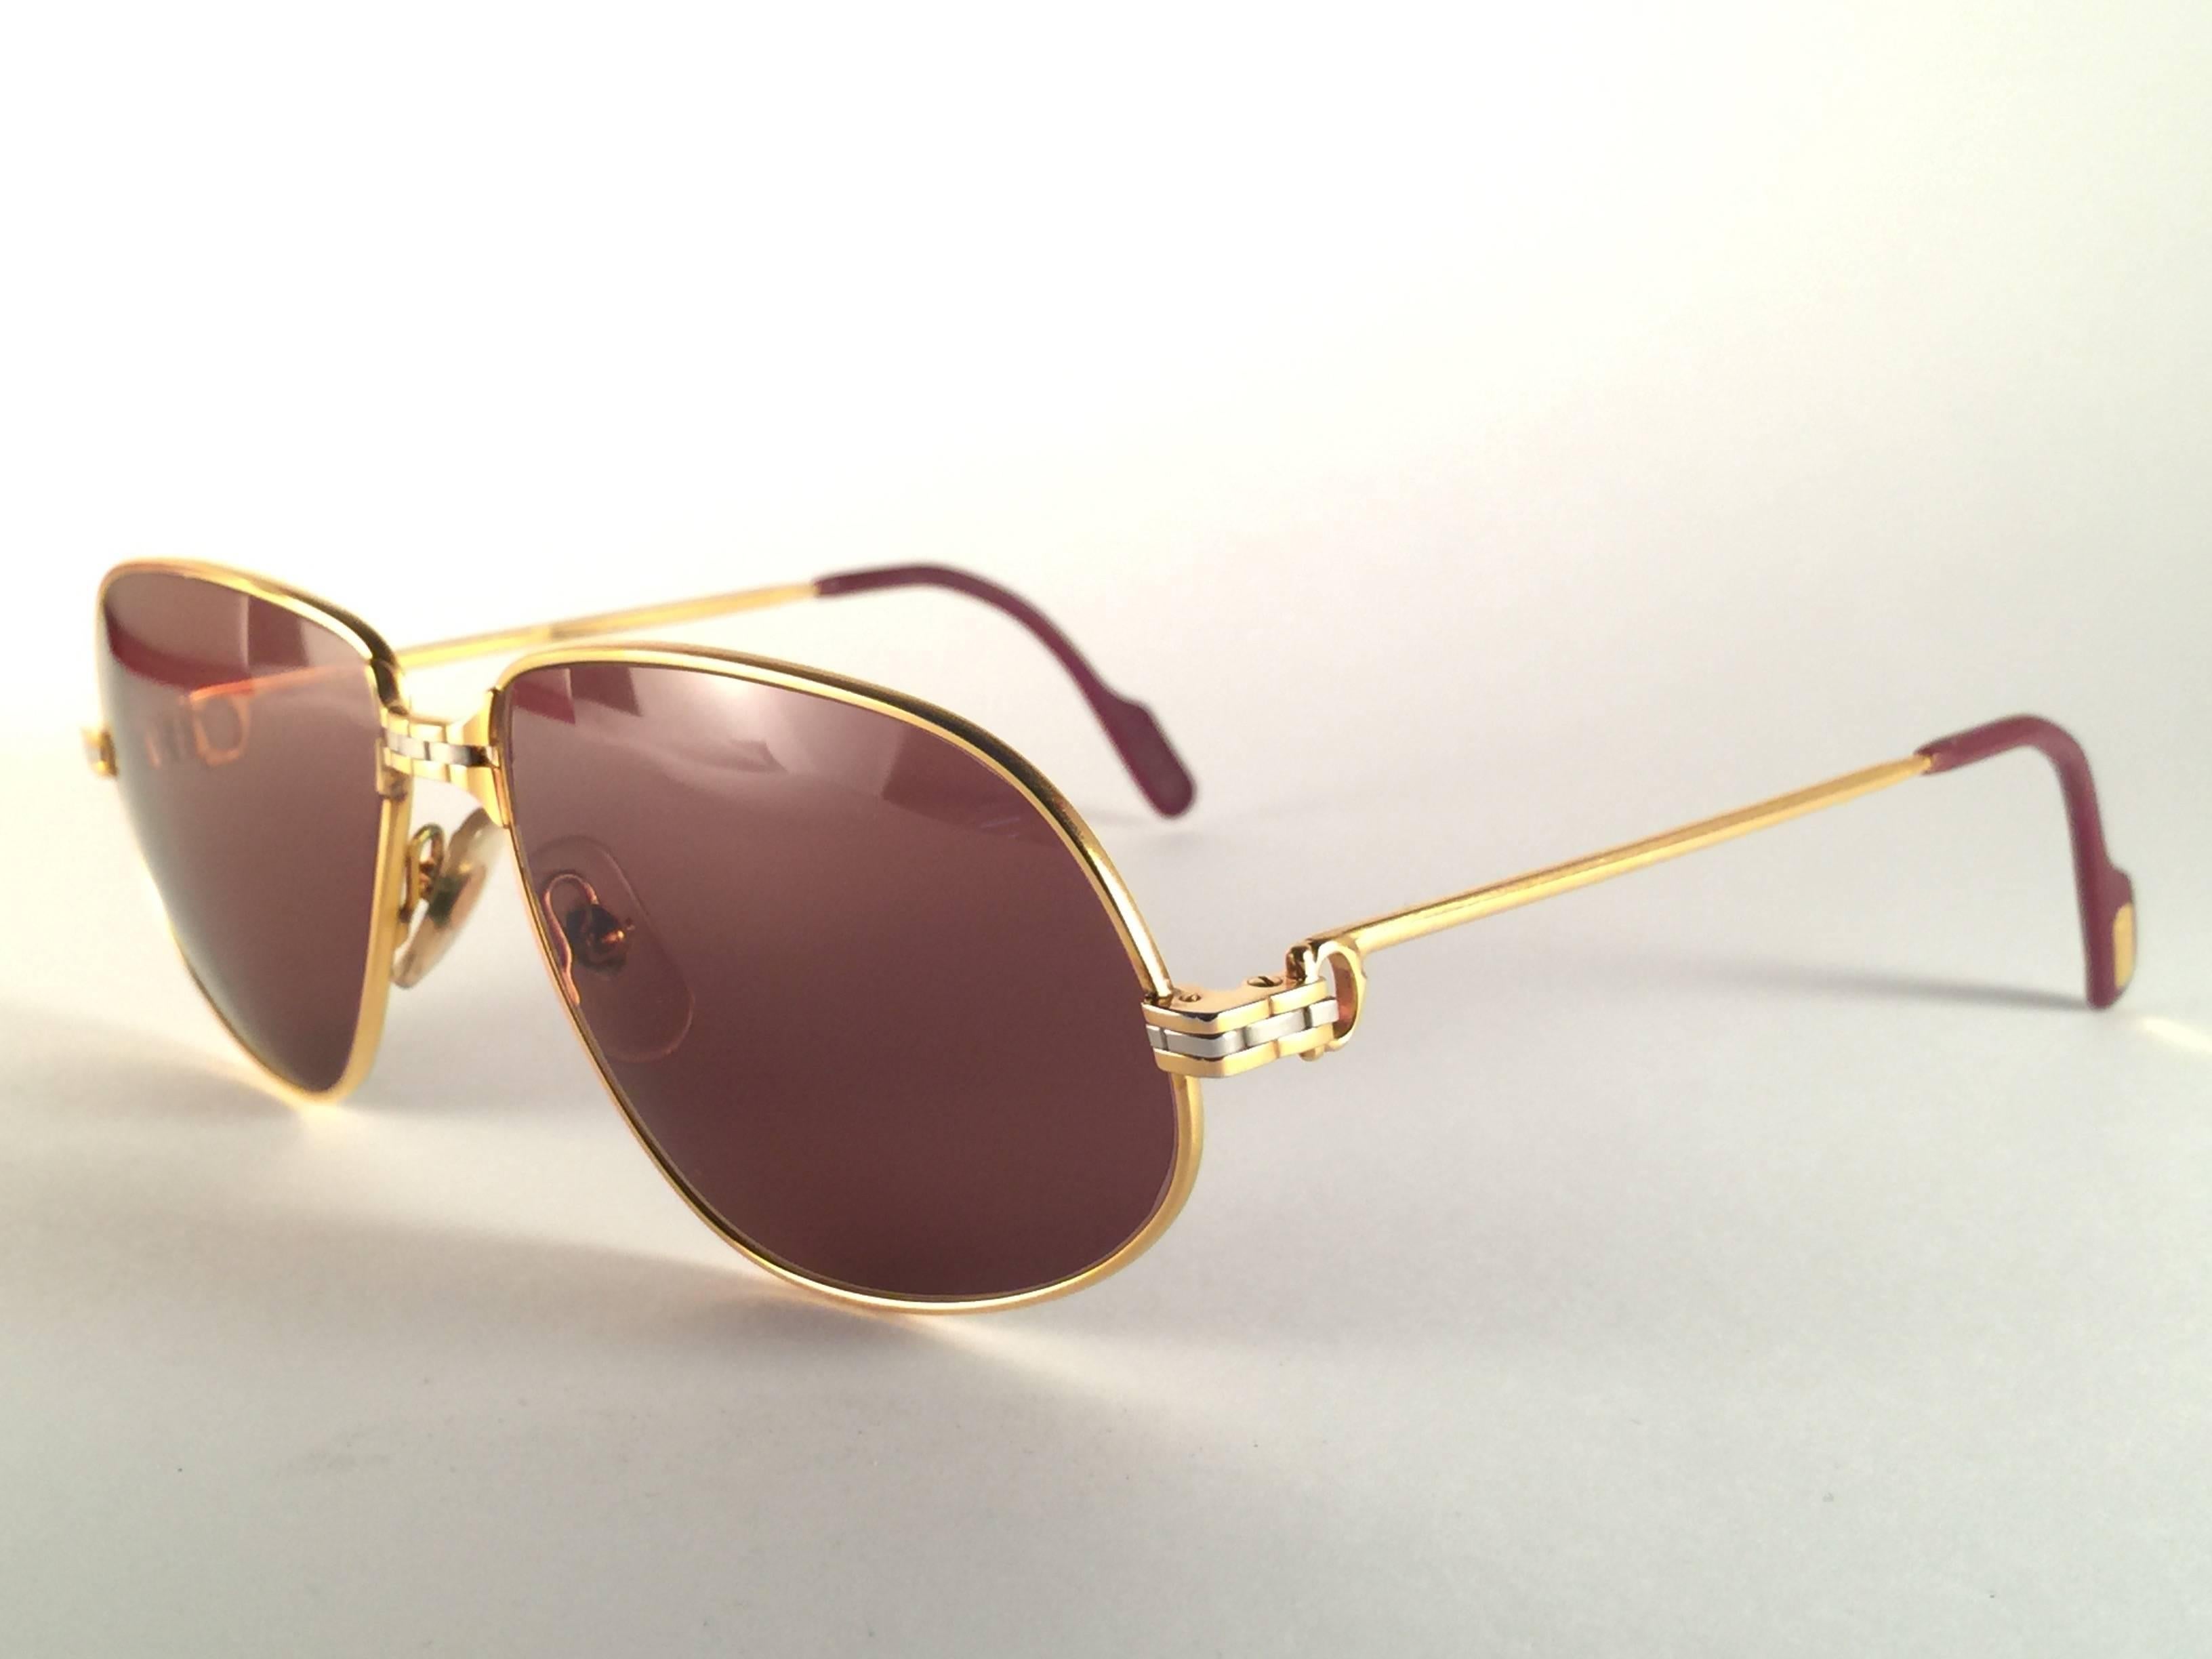 New Vintage Cartier Panthere 59mm Medium Sunglasses France 18k Gold Heavy Plated For Sale 2